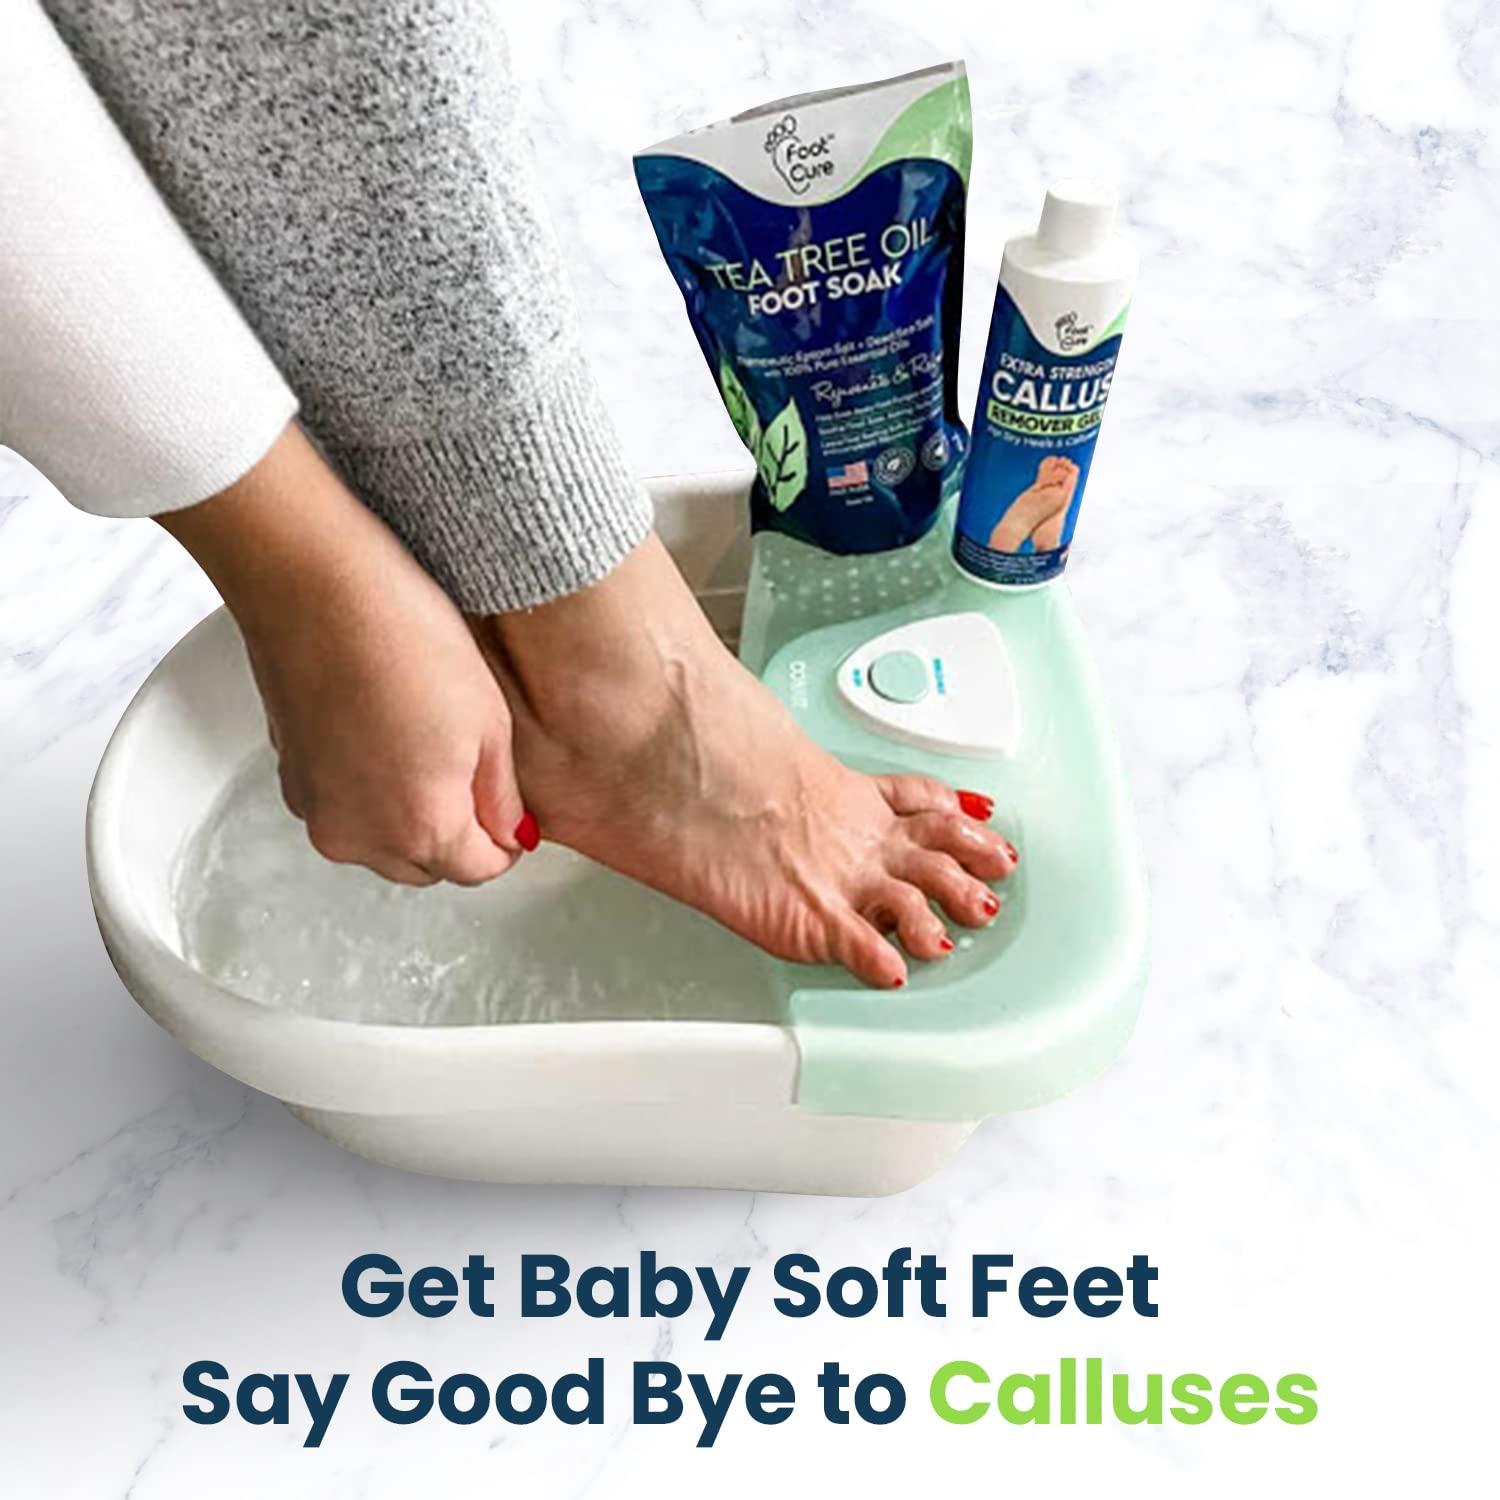 Dr Foot Callus Remover Gel Helps to remove Calluses and Corns also helps  for Dry, Cracked skin with the Goodness of Urea, Tea Tree Oil, Coconut Oil,  Aloe Vera Gel - 100ml 